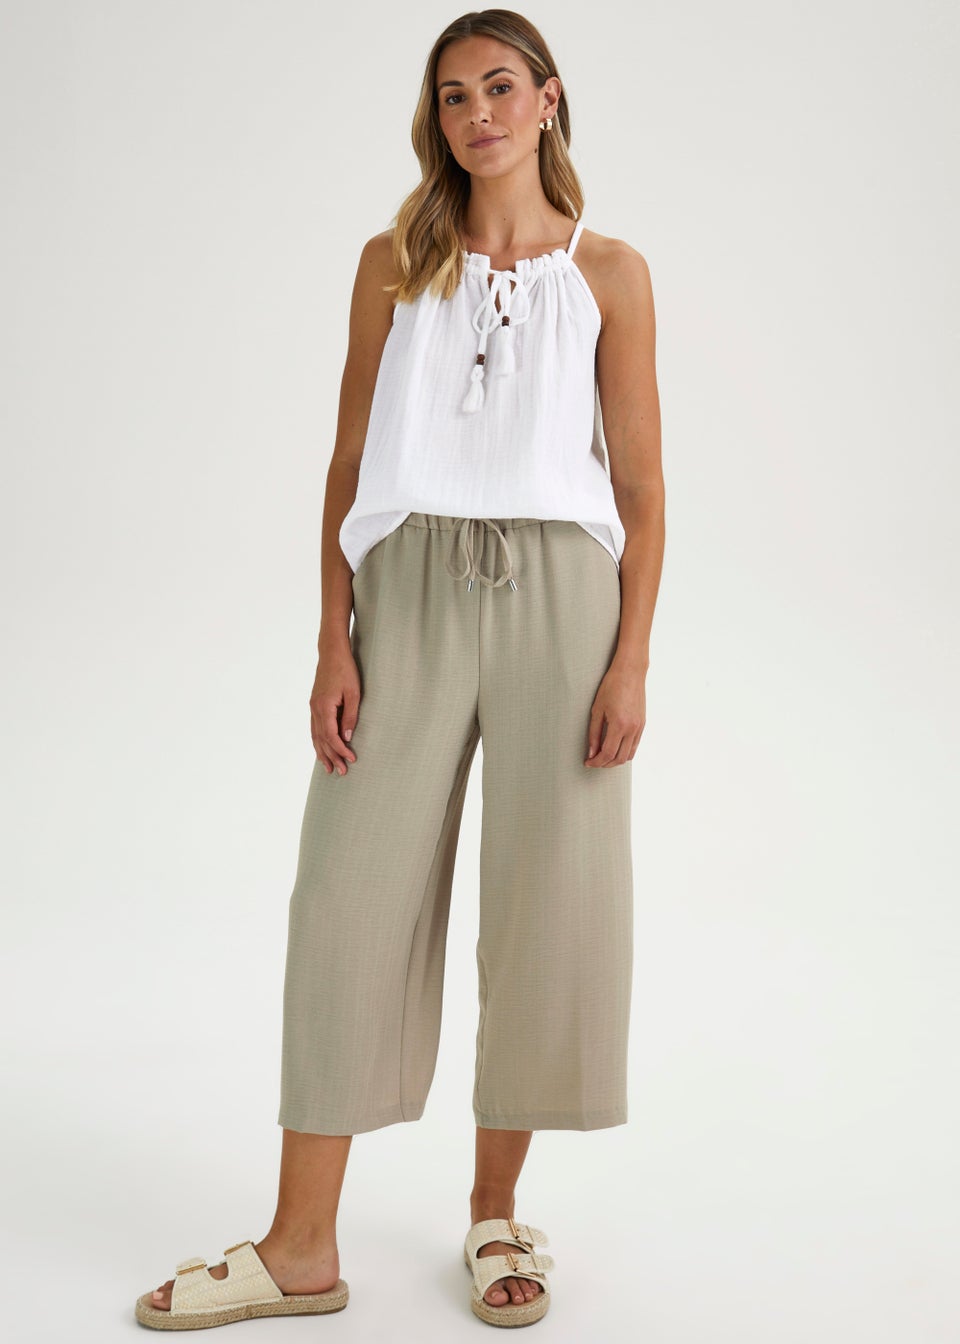 Black Cropped Trousers - Matalan